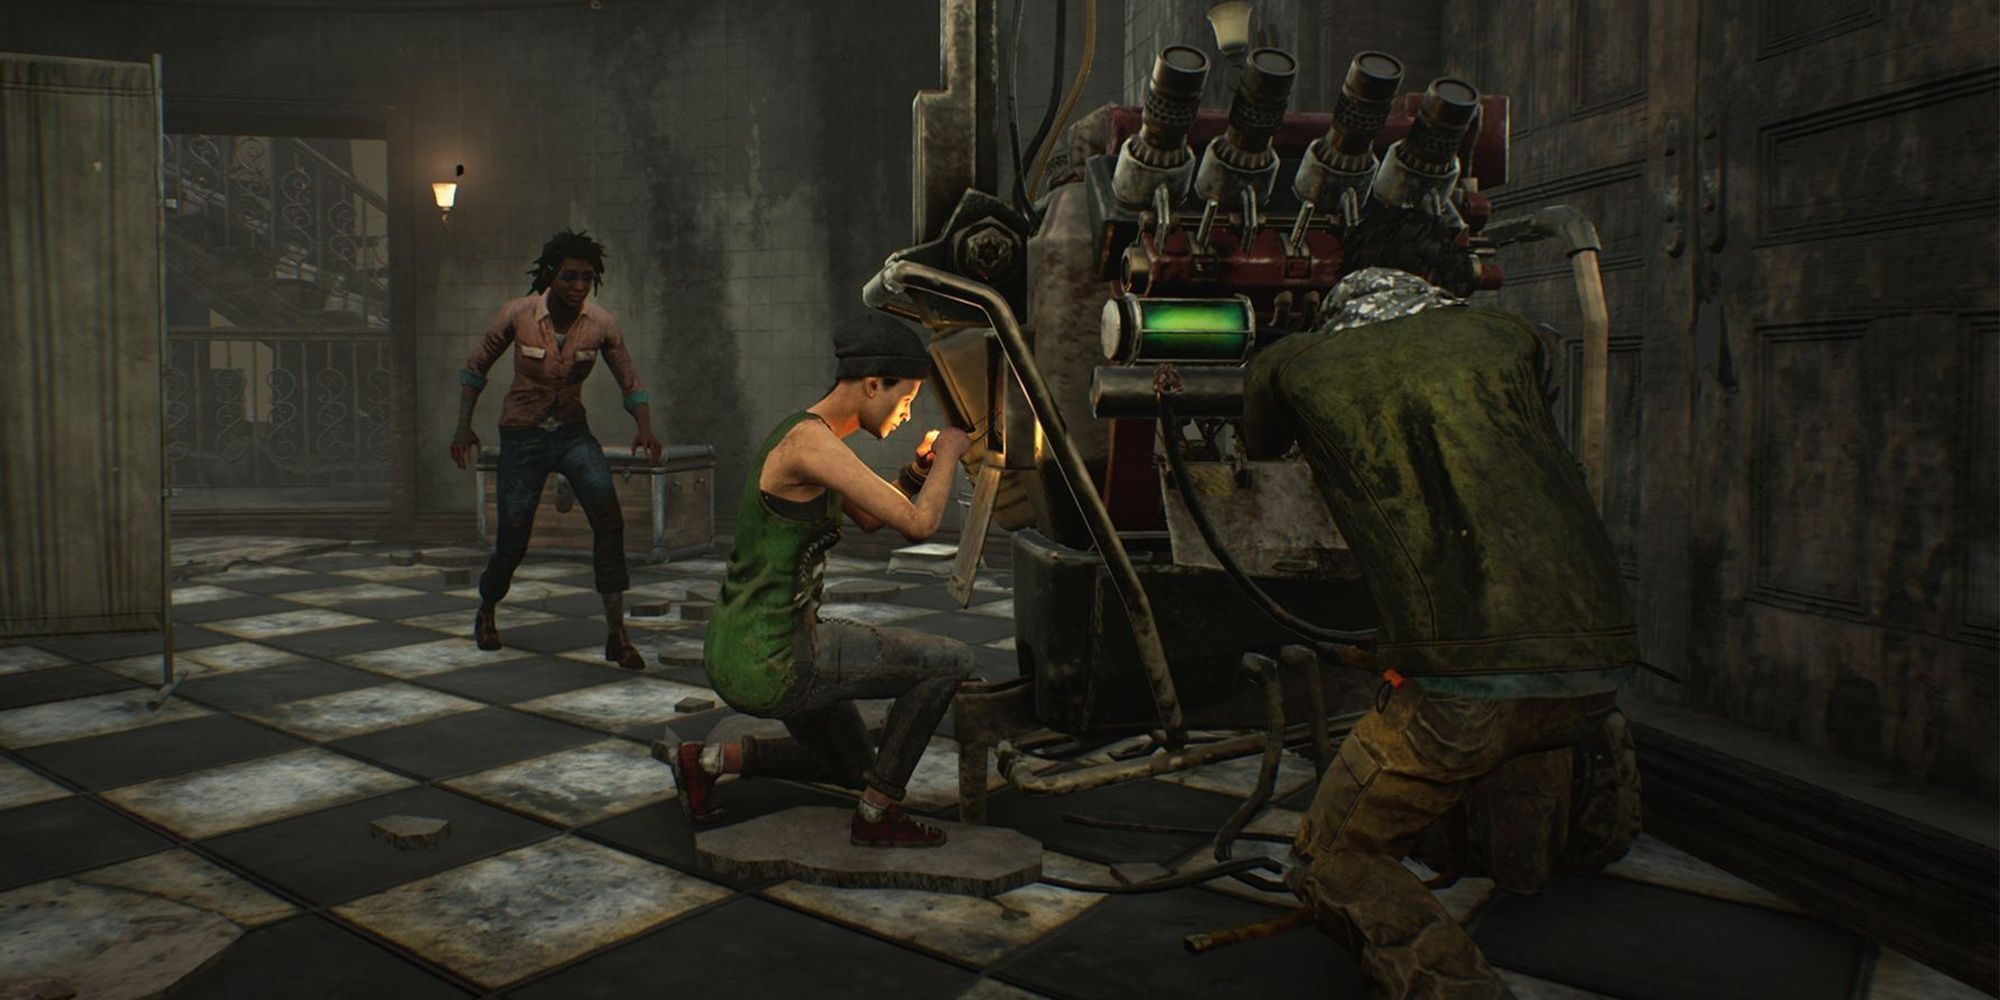 Dead By Daylight: Survivors Attempting To Repair A Generator Together